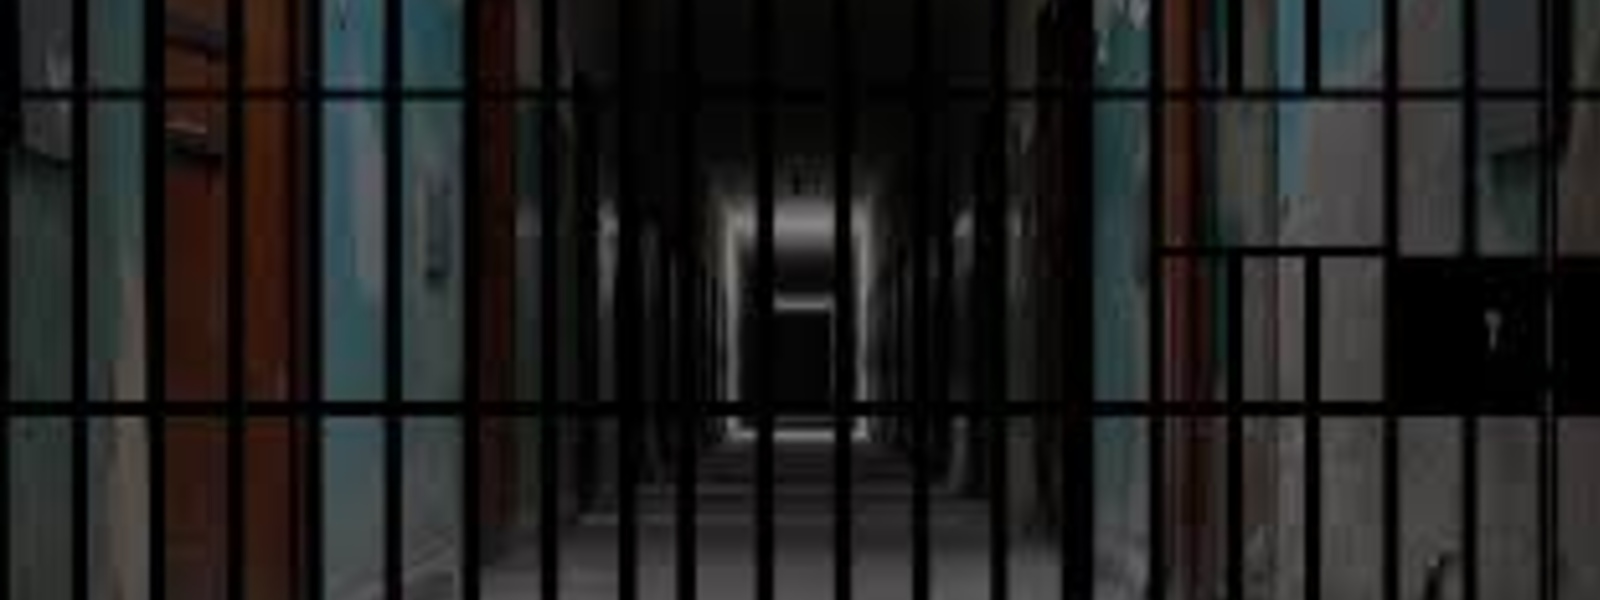 RETIRED ARMY PERSONNEL TO FORM SPECIAL PRISON UNIT